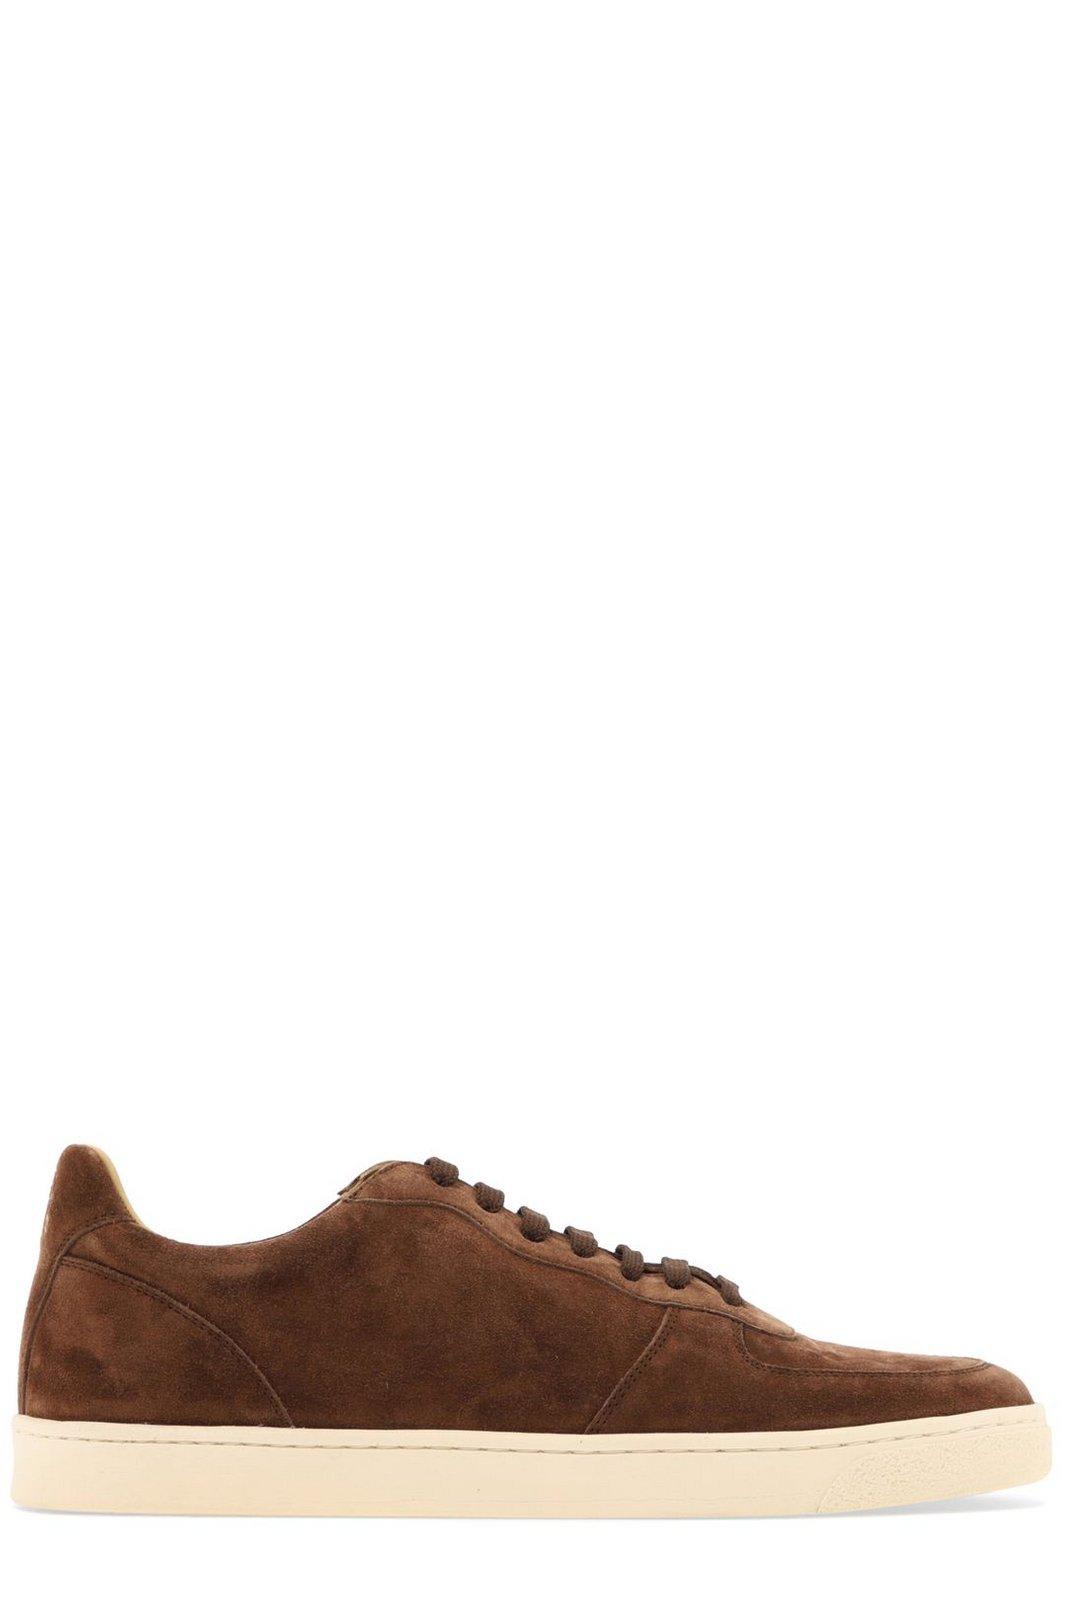 Brunello Cucinelli Suede Low-top Lace-up Sneakers